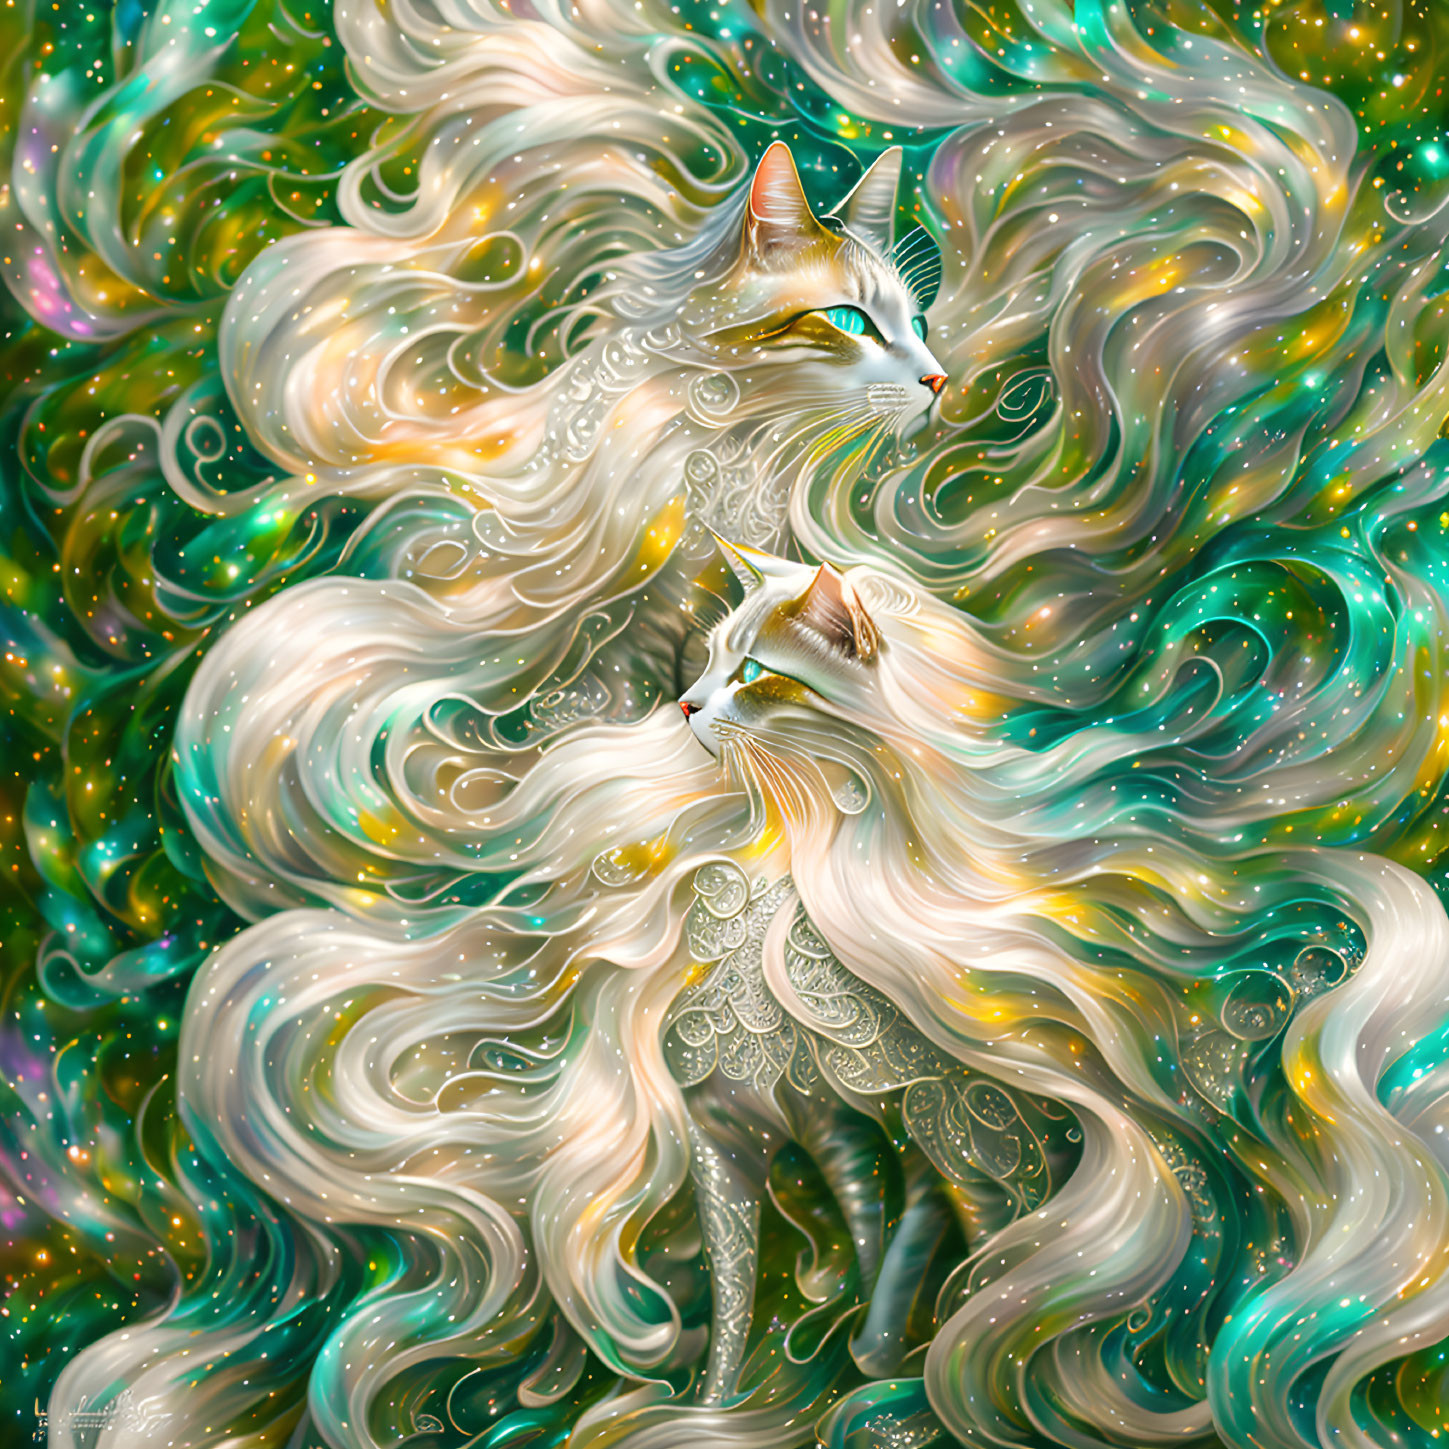 Ethereal cats in swirling cosmic background with intricate patterns